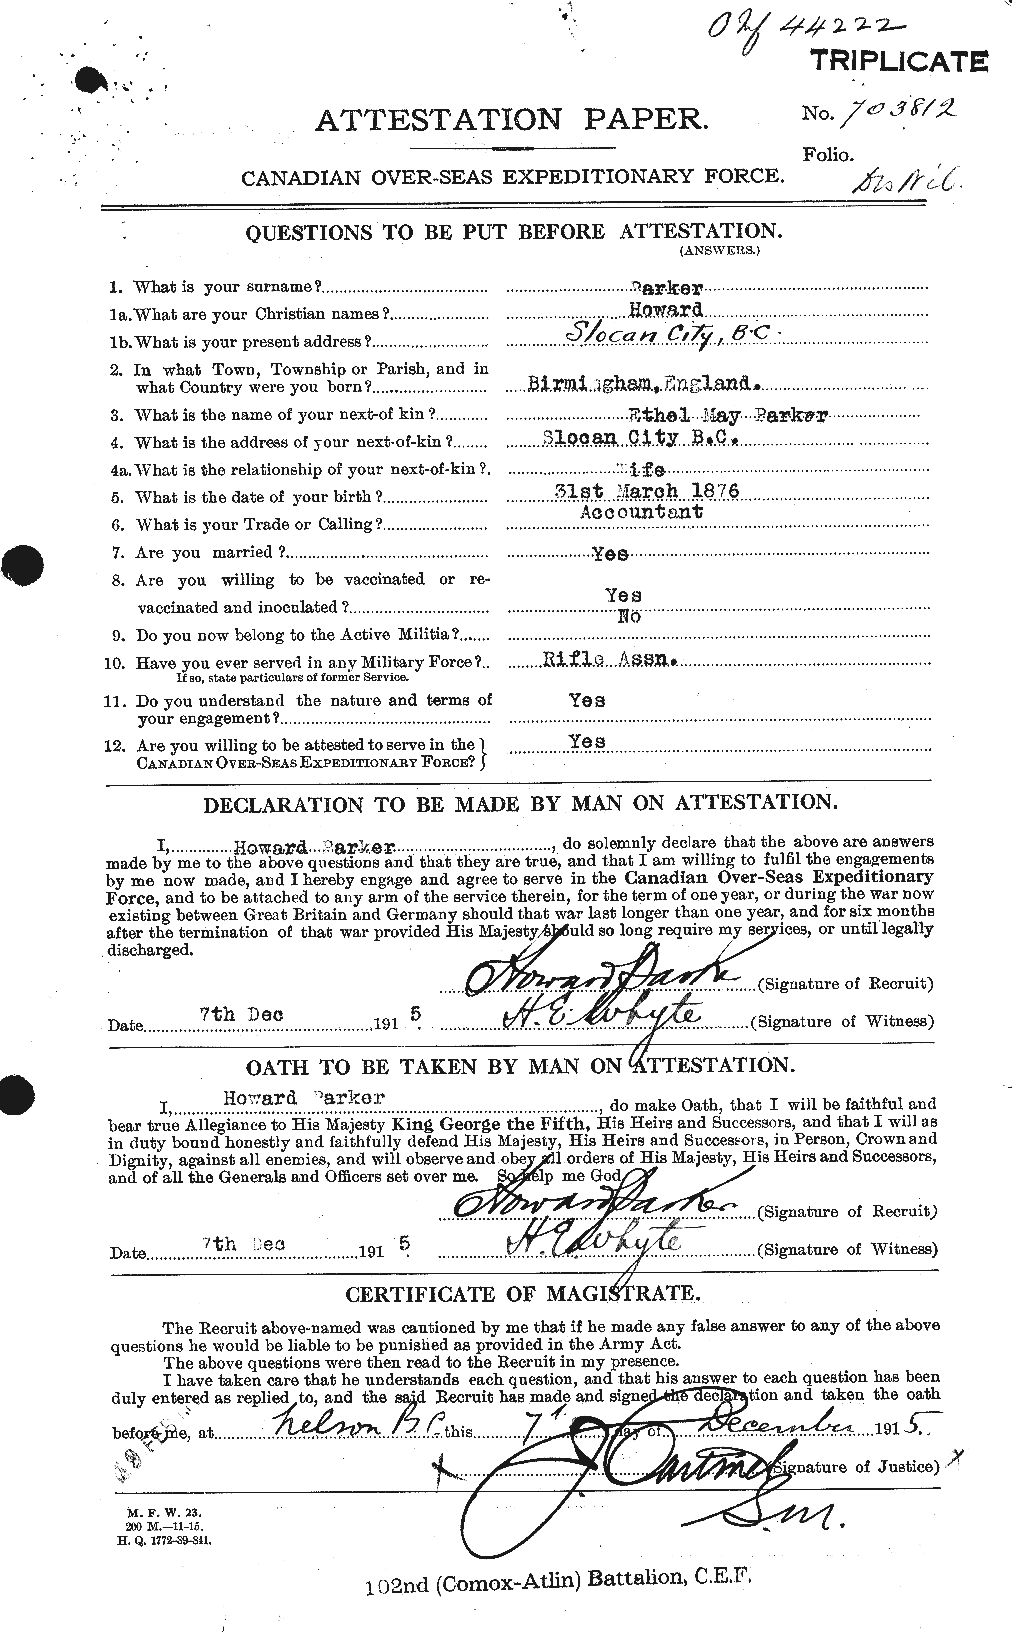 Personnel Records of the First World War - CEF 565387a